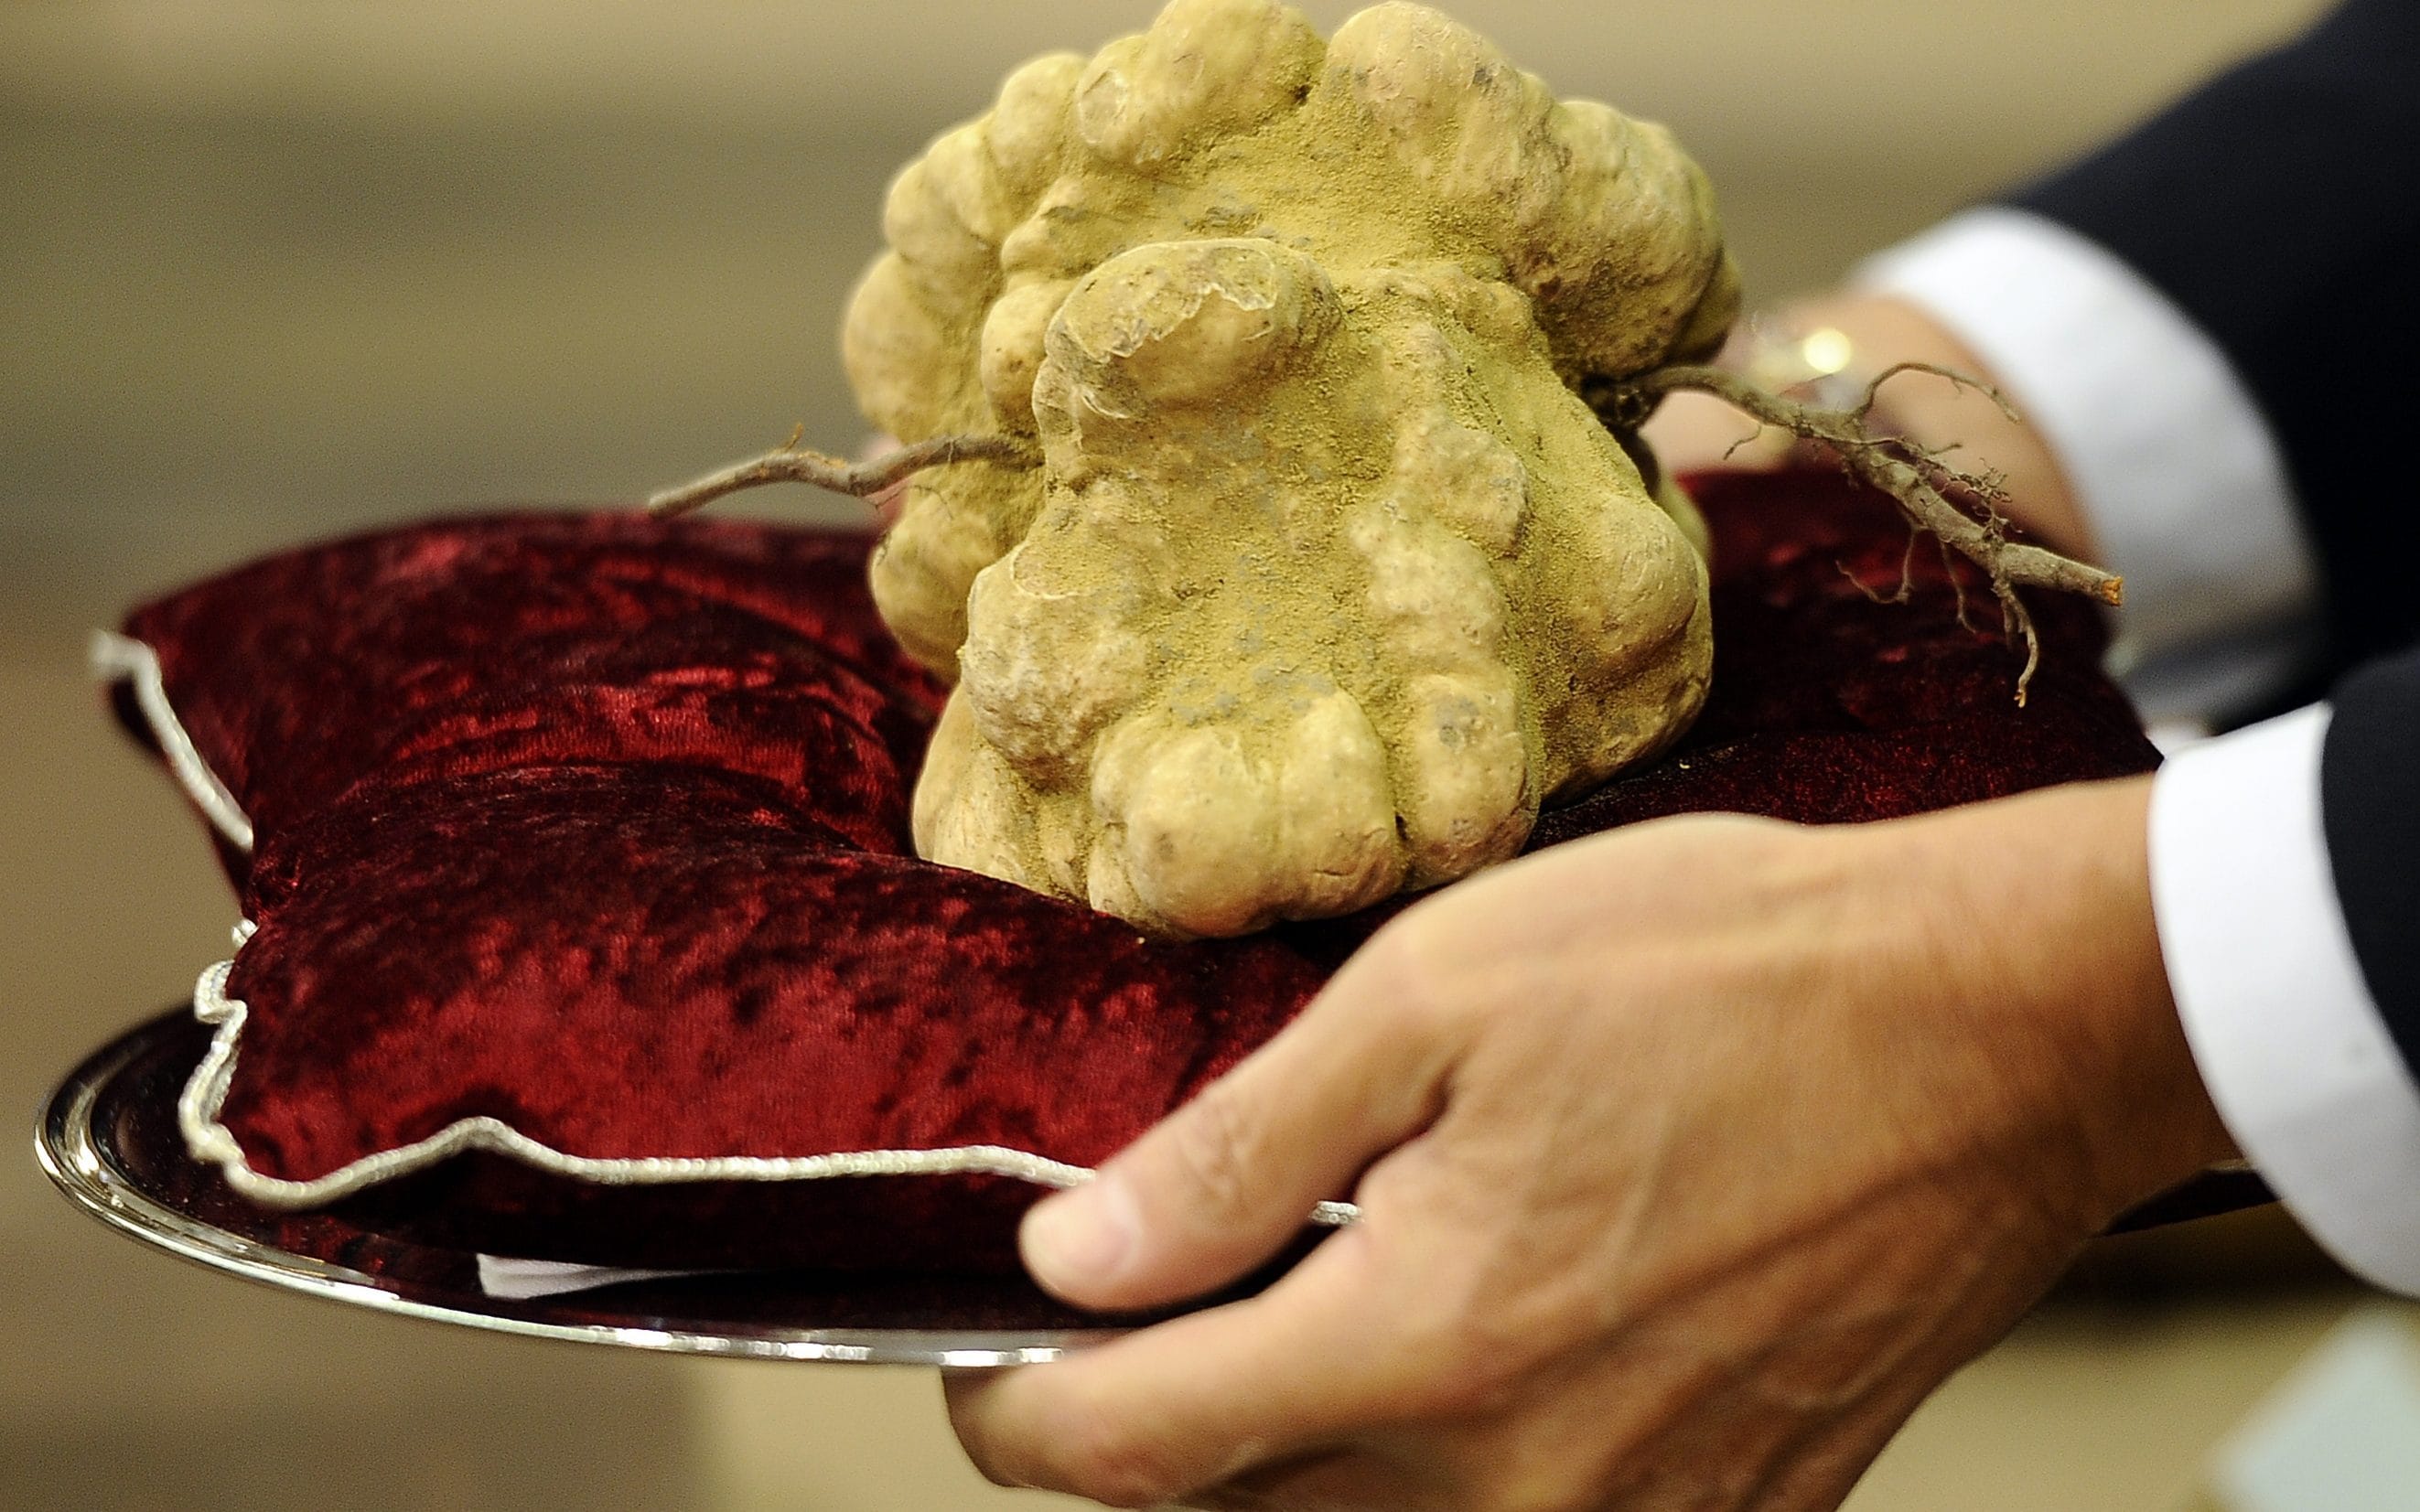 White truffles are amongst the most expensive foods in the world.